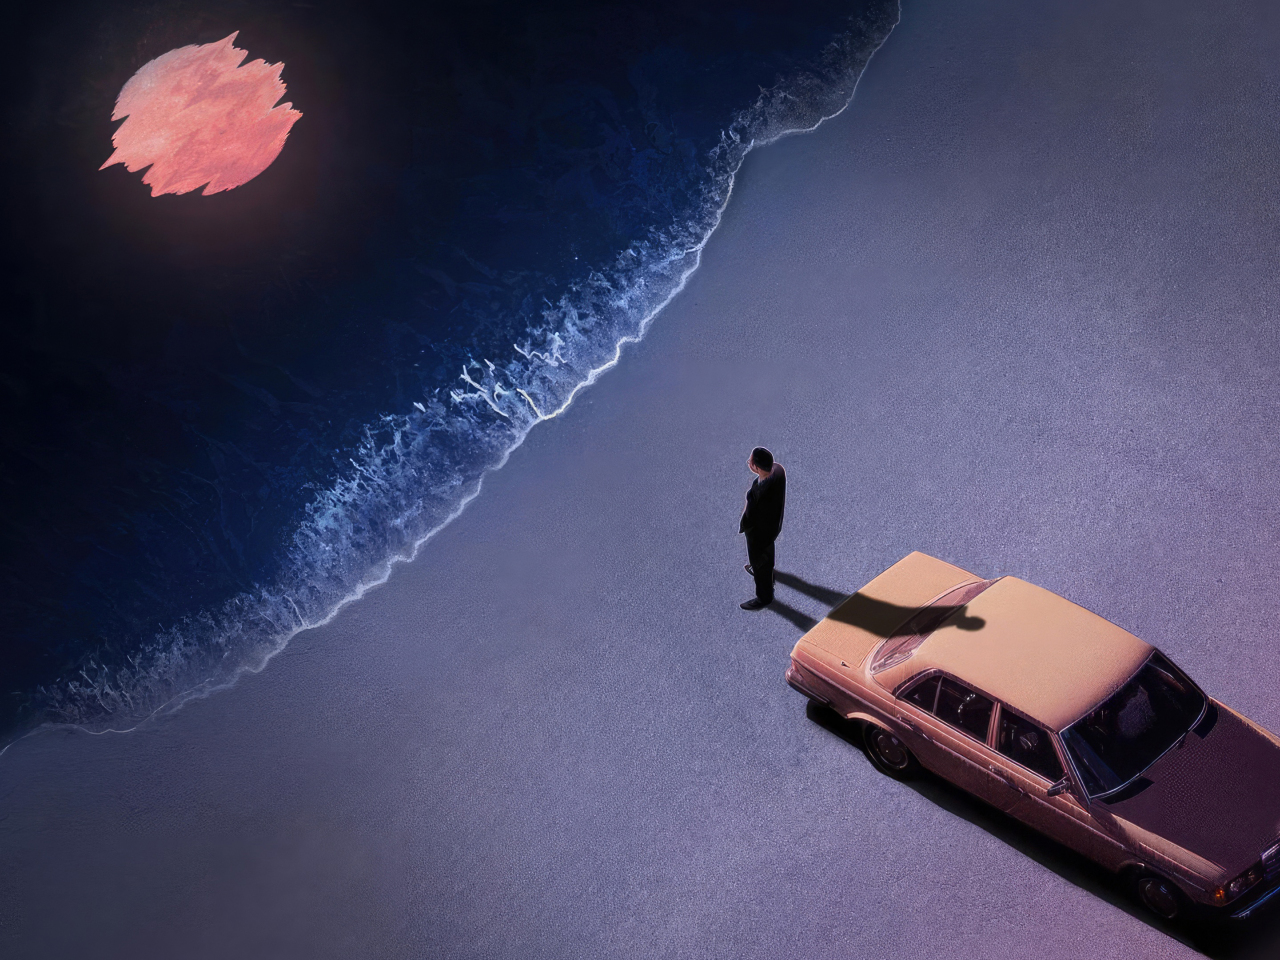 Lonely at night at the beach, car and man, art , 1280x960 wallpaper